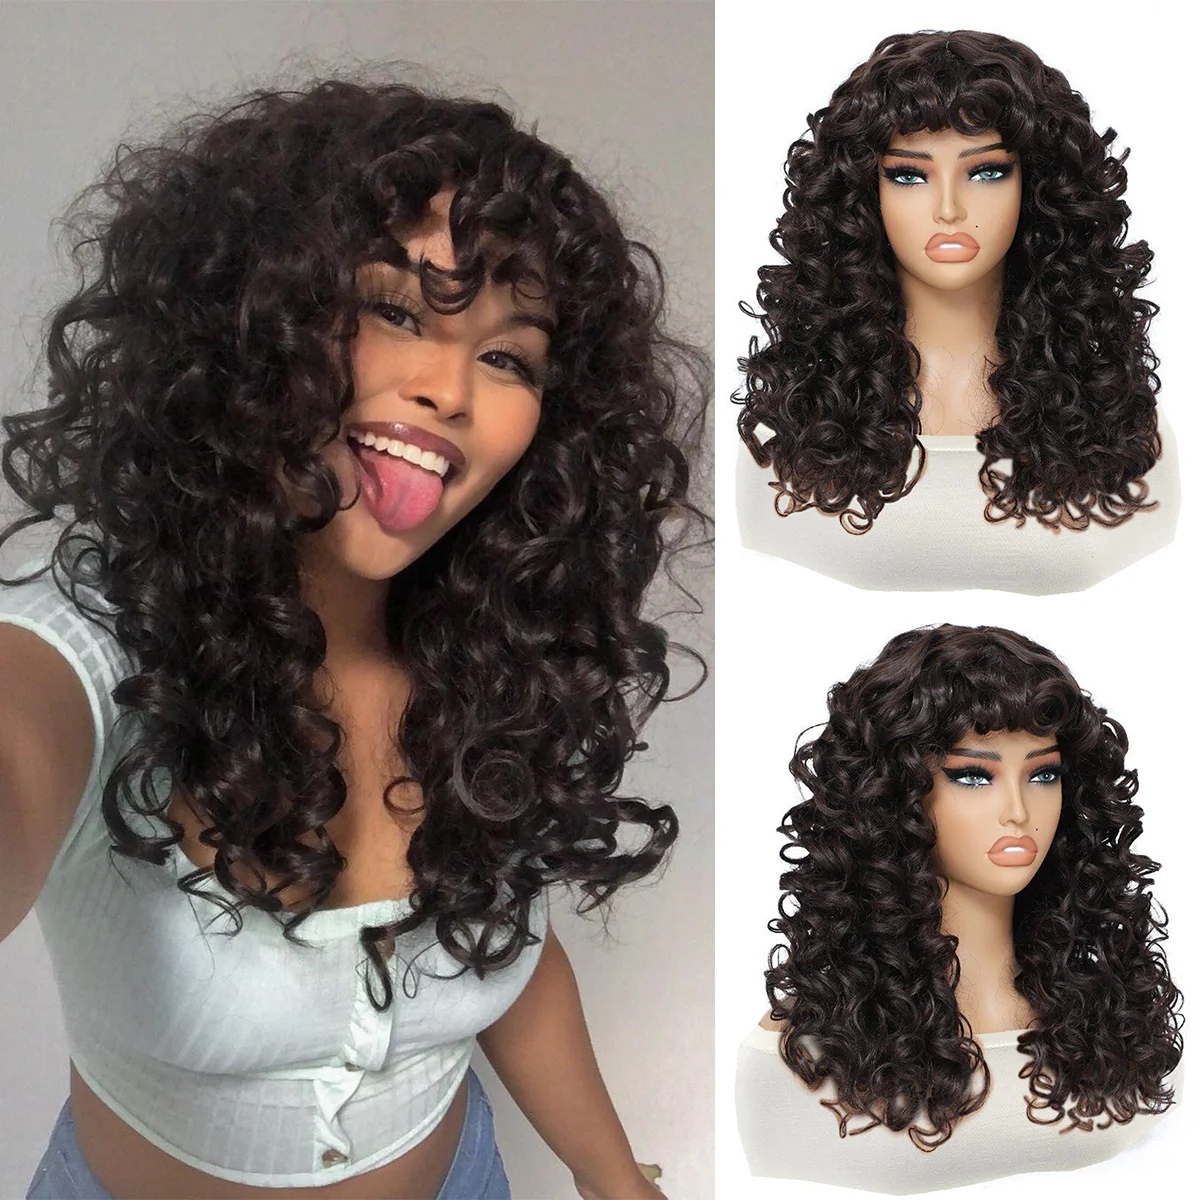 

Bouncy Curls Wigs with Bangs Chocolate Brown 18 inch Chemical Fiber Wig Bangs Wig Daily Used Easy to Wear Synthetic Curly Wig